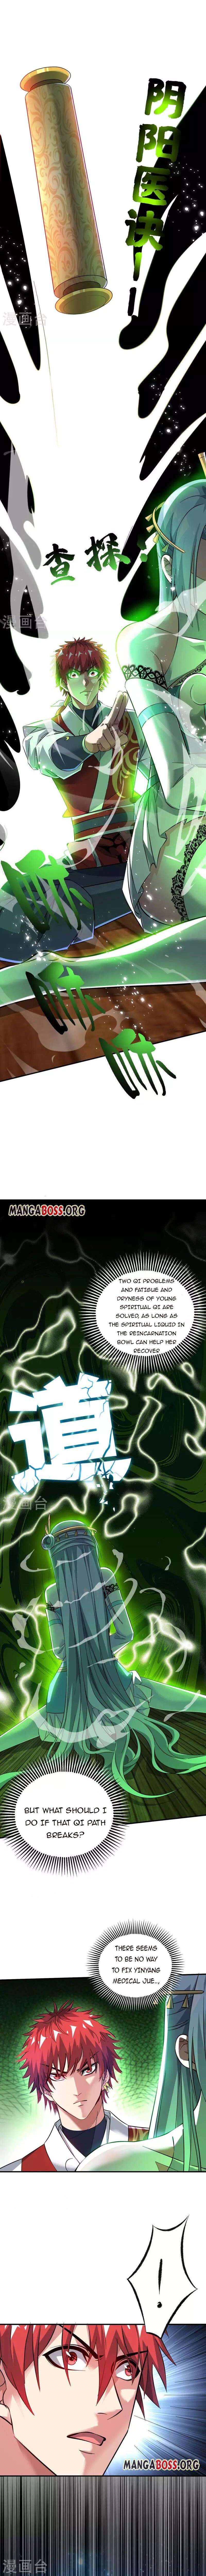 The First Son-In-Law Vanguard of All Time Chapter 182 page 3